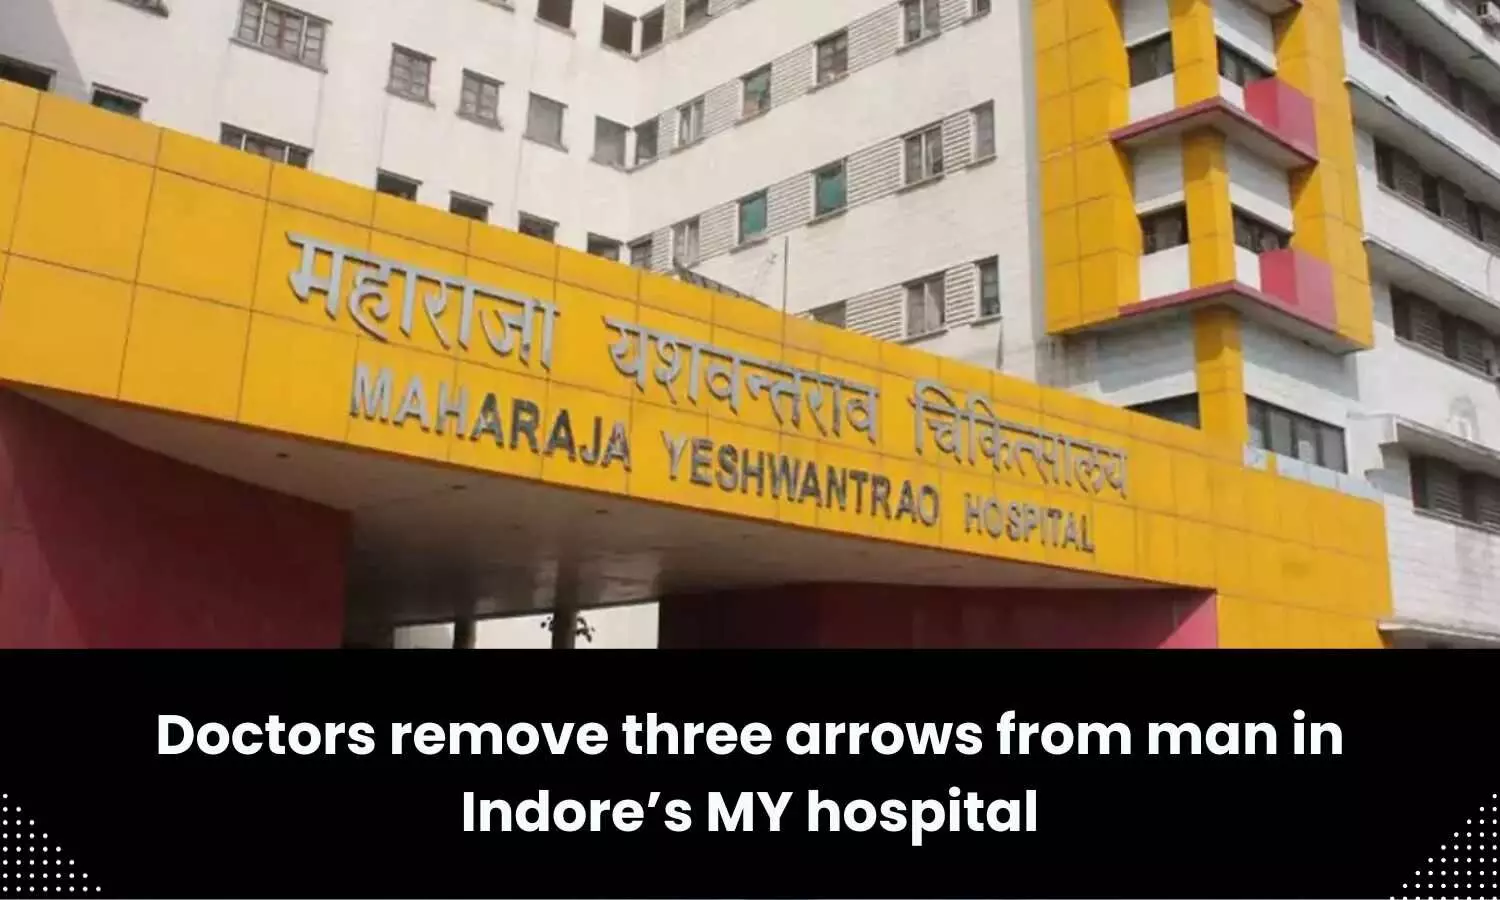 3 poisonous arrows removed from man in Indores MY hospital